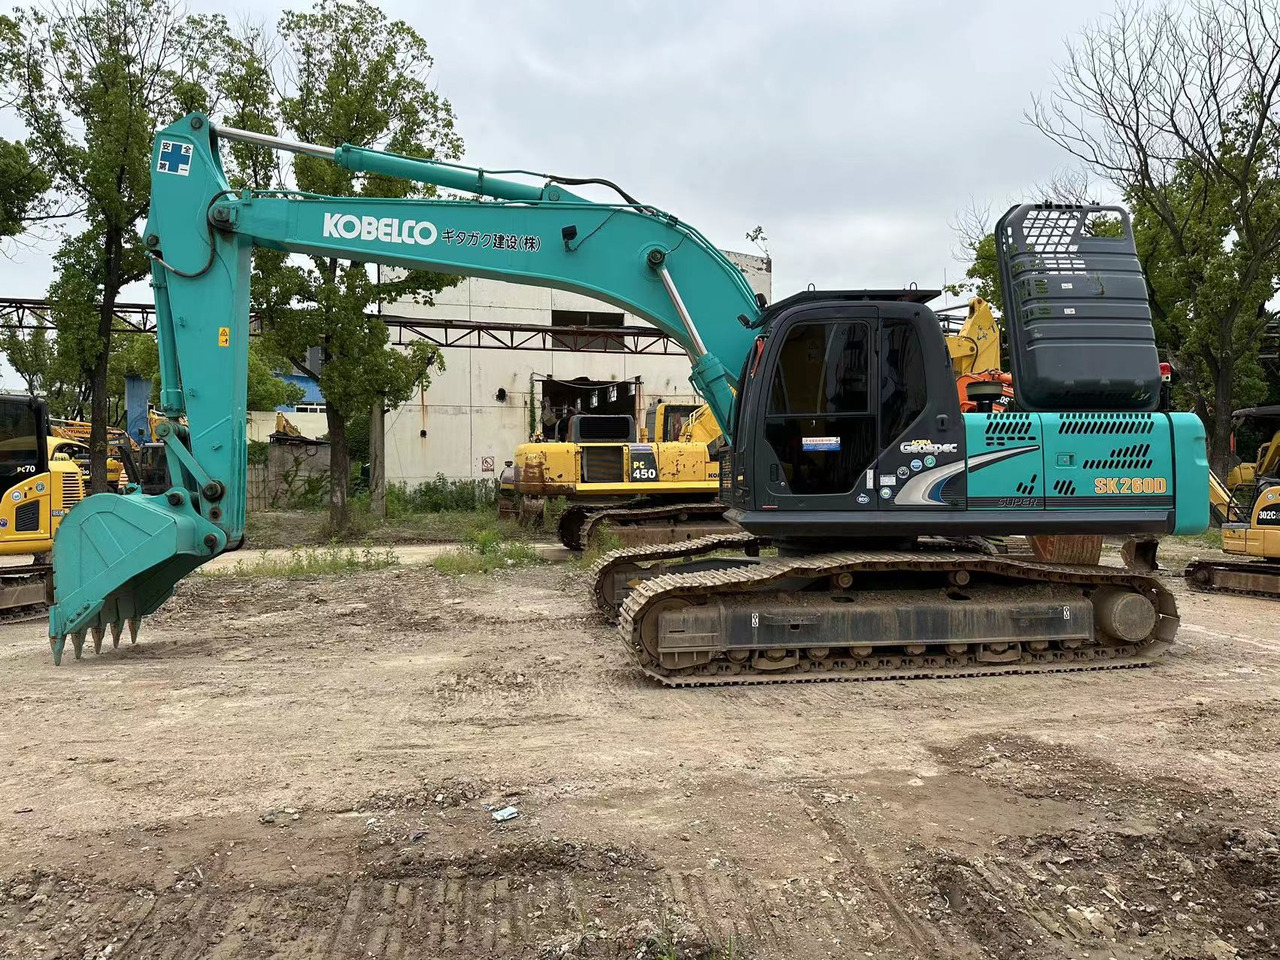 Crawler excavator KOBELCO 26 ton original used excavator SK260D, Large engineering construction machinery good condition low price for sale: picture 2